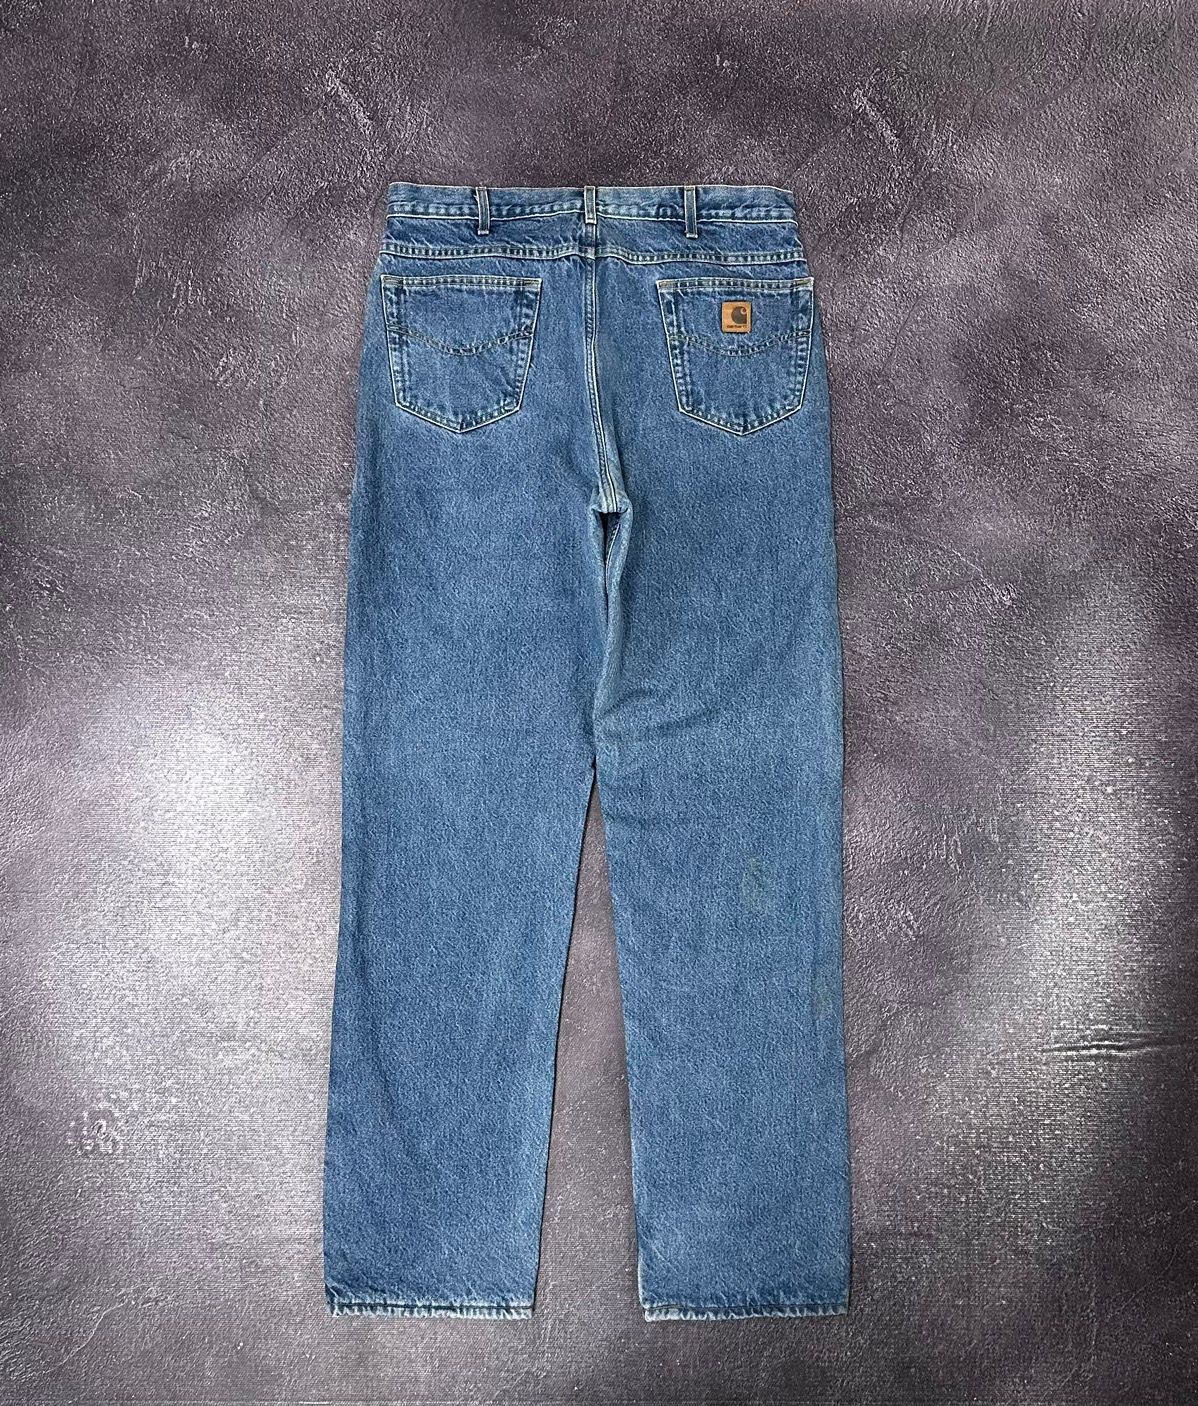 Pre-owned Carhartt X Vintage 90's Carhartt Baggy Work Faded Blue Denim Jeans Pant